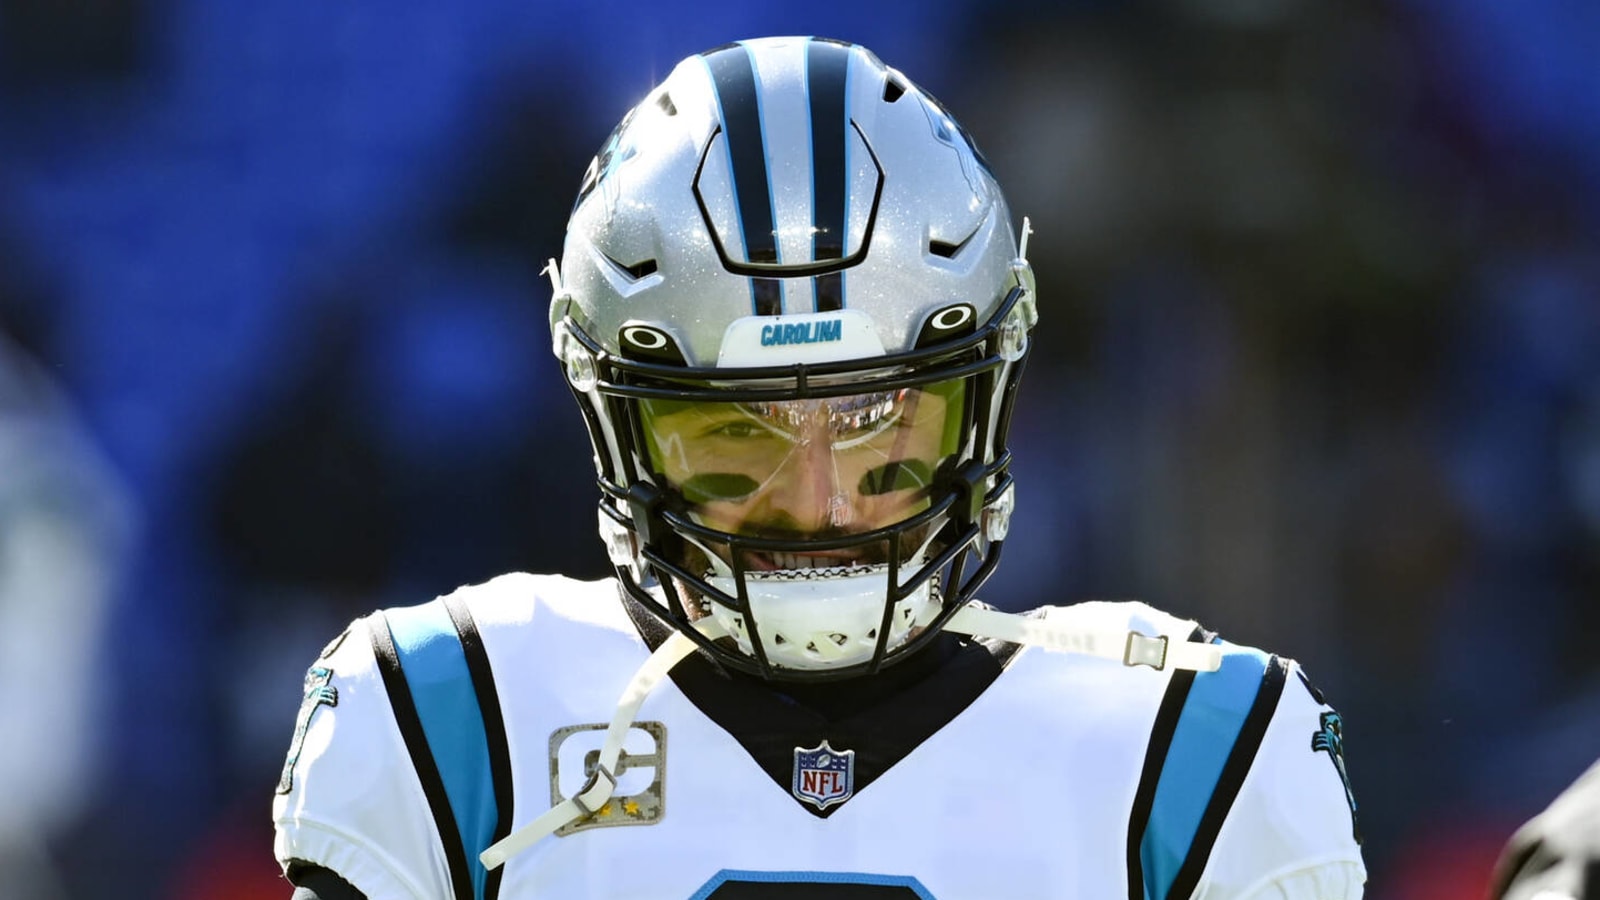 Panthers waive struggling QB Mayfield, a former No. 1 pick